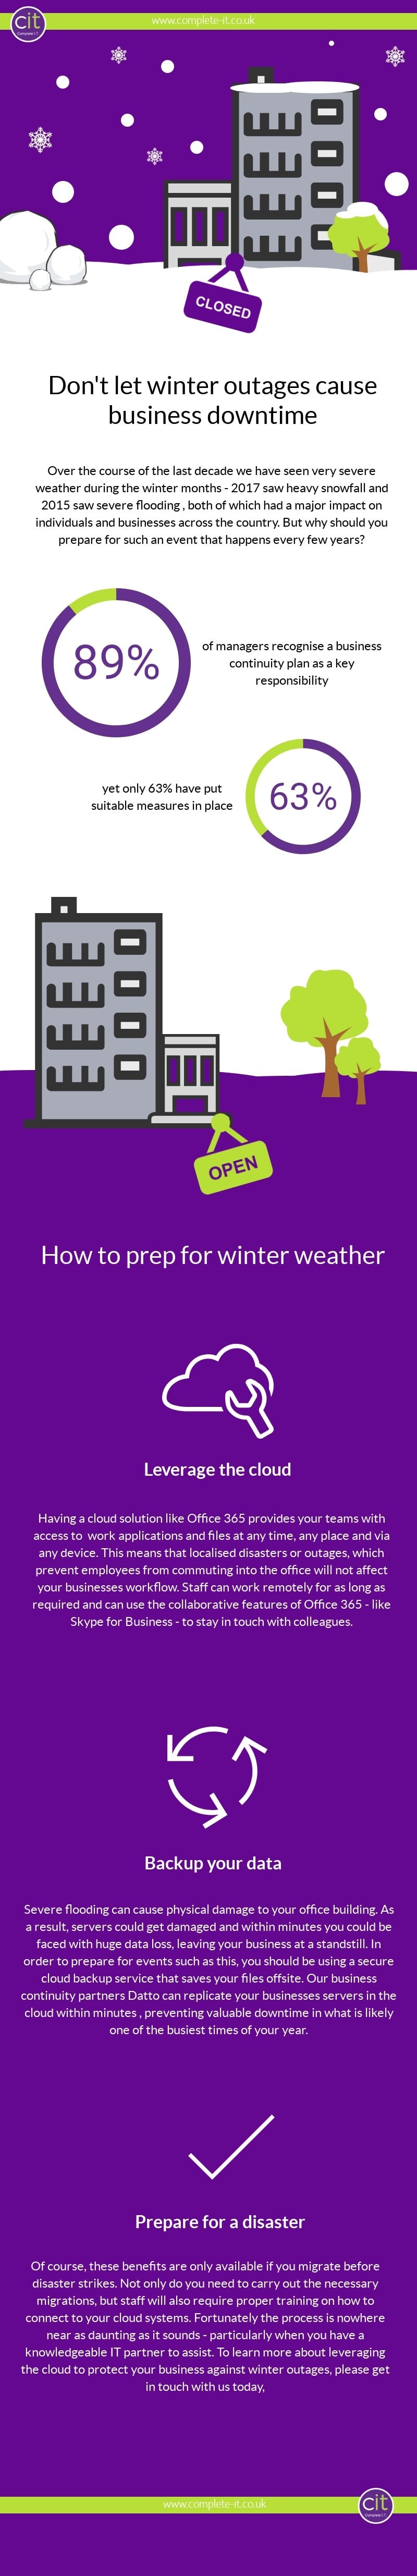 Prevent-winter-downtime